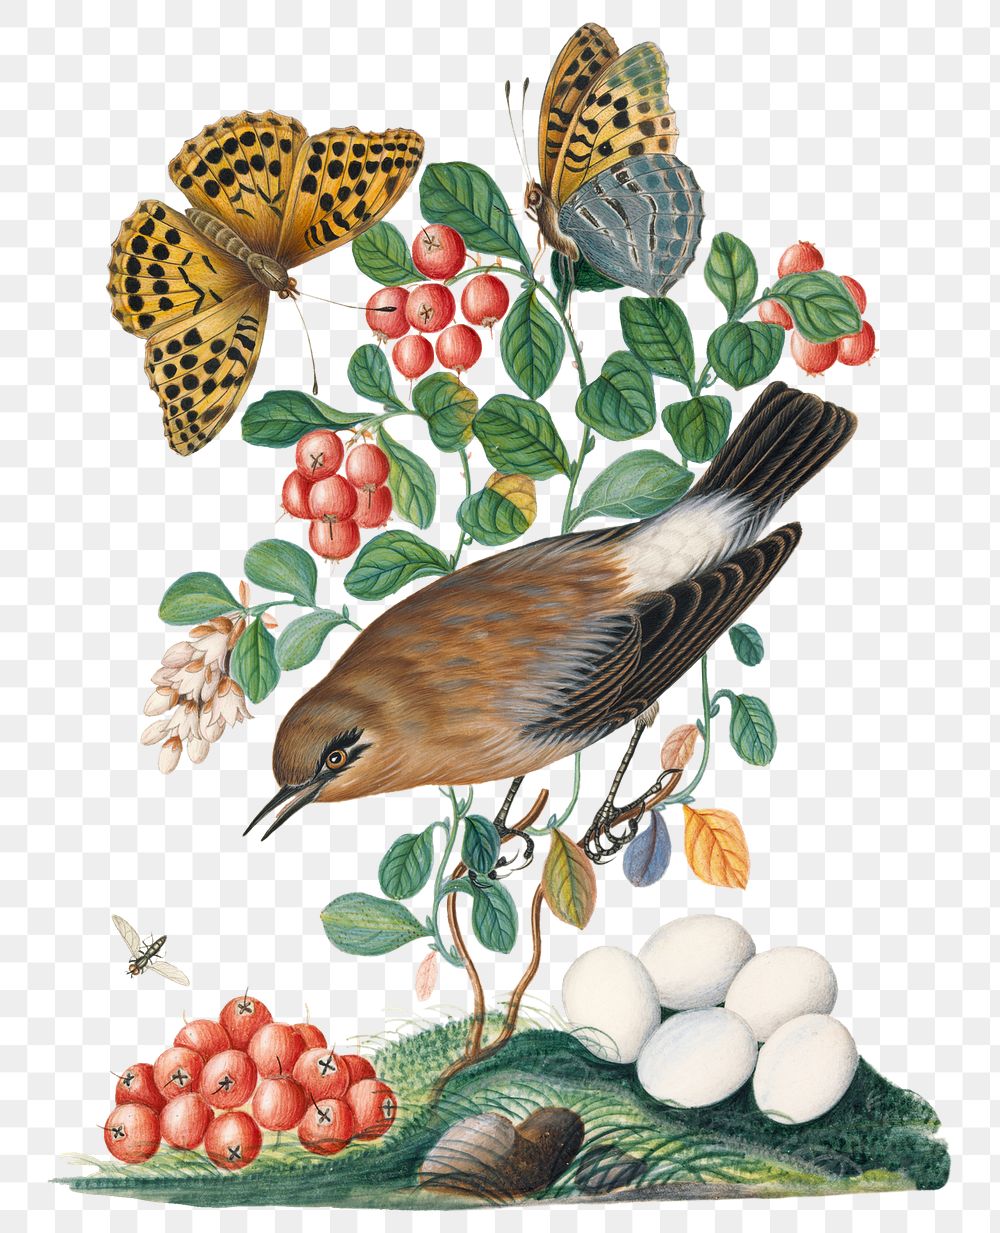 Bird, butterfly png sticker, cowberry plant, watercolor painting, remixed from artworks by James Bolton